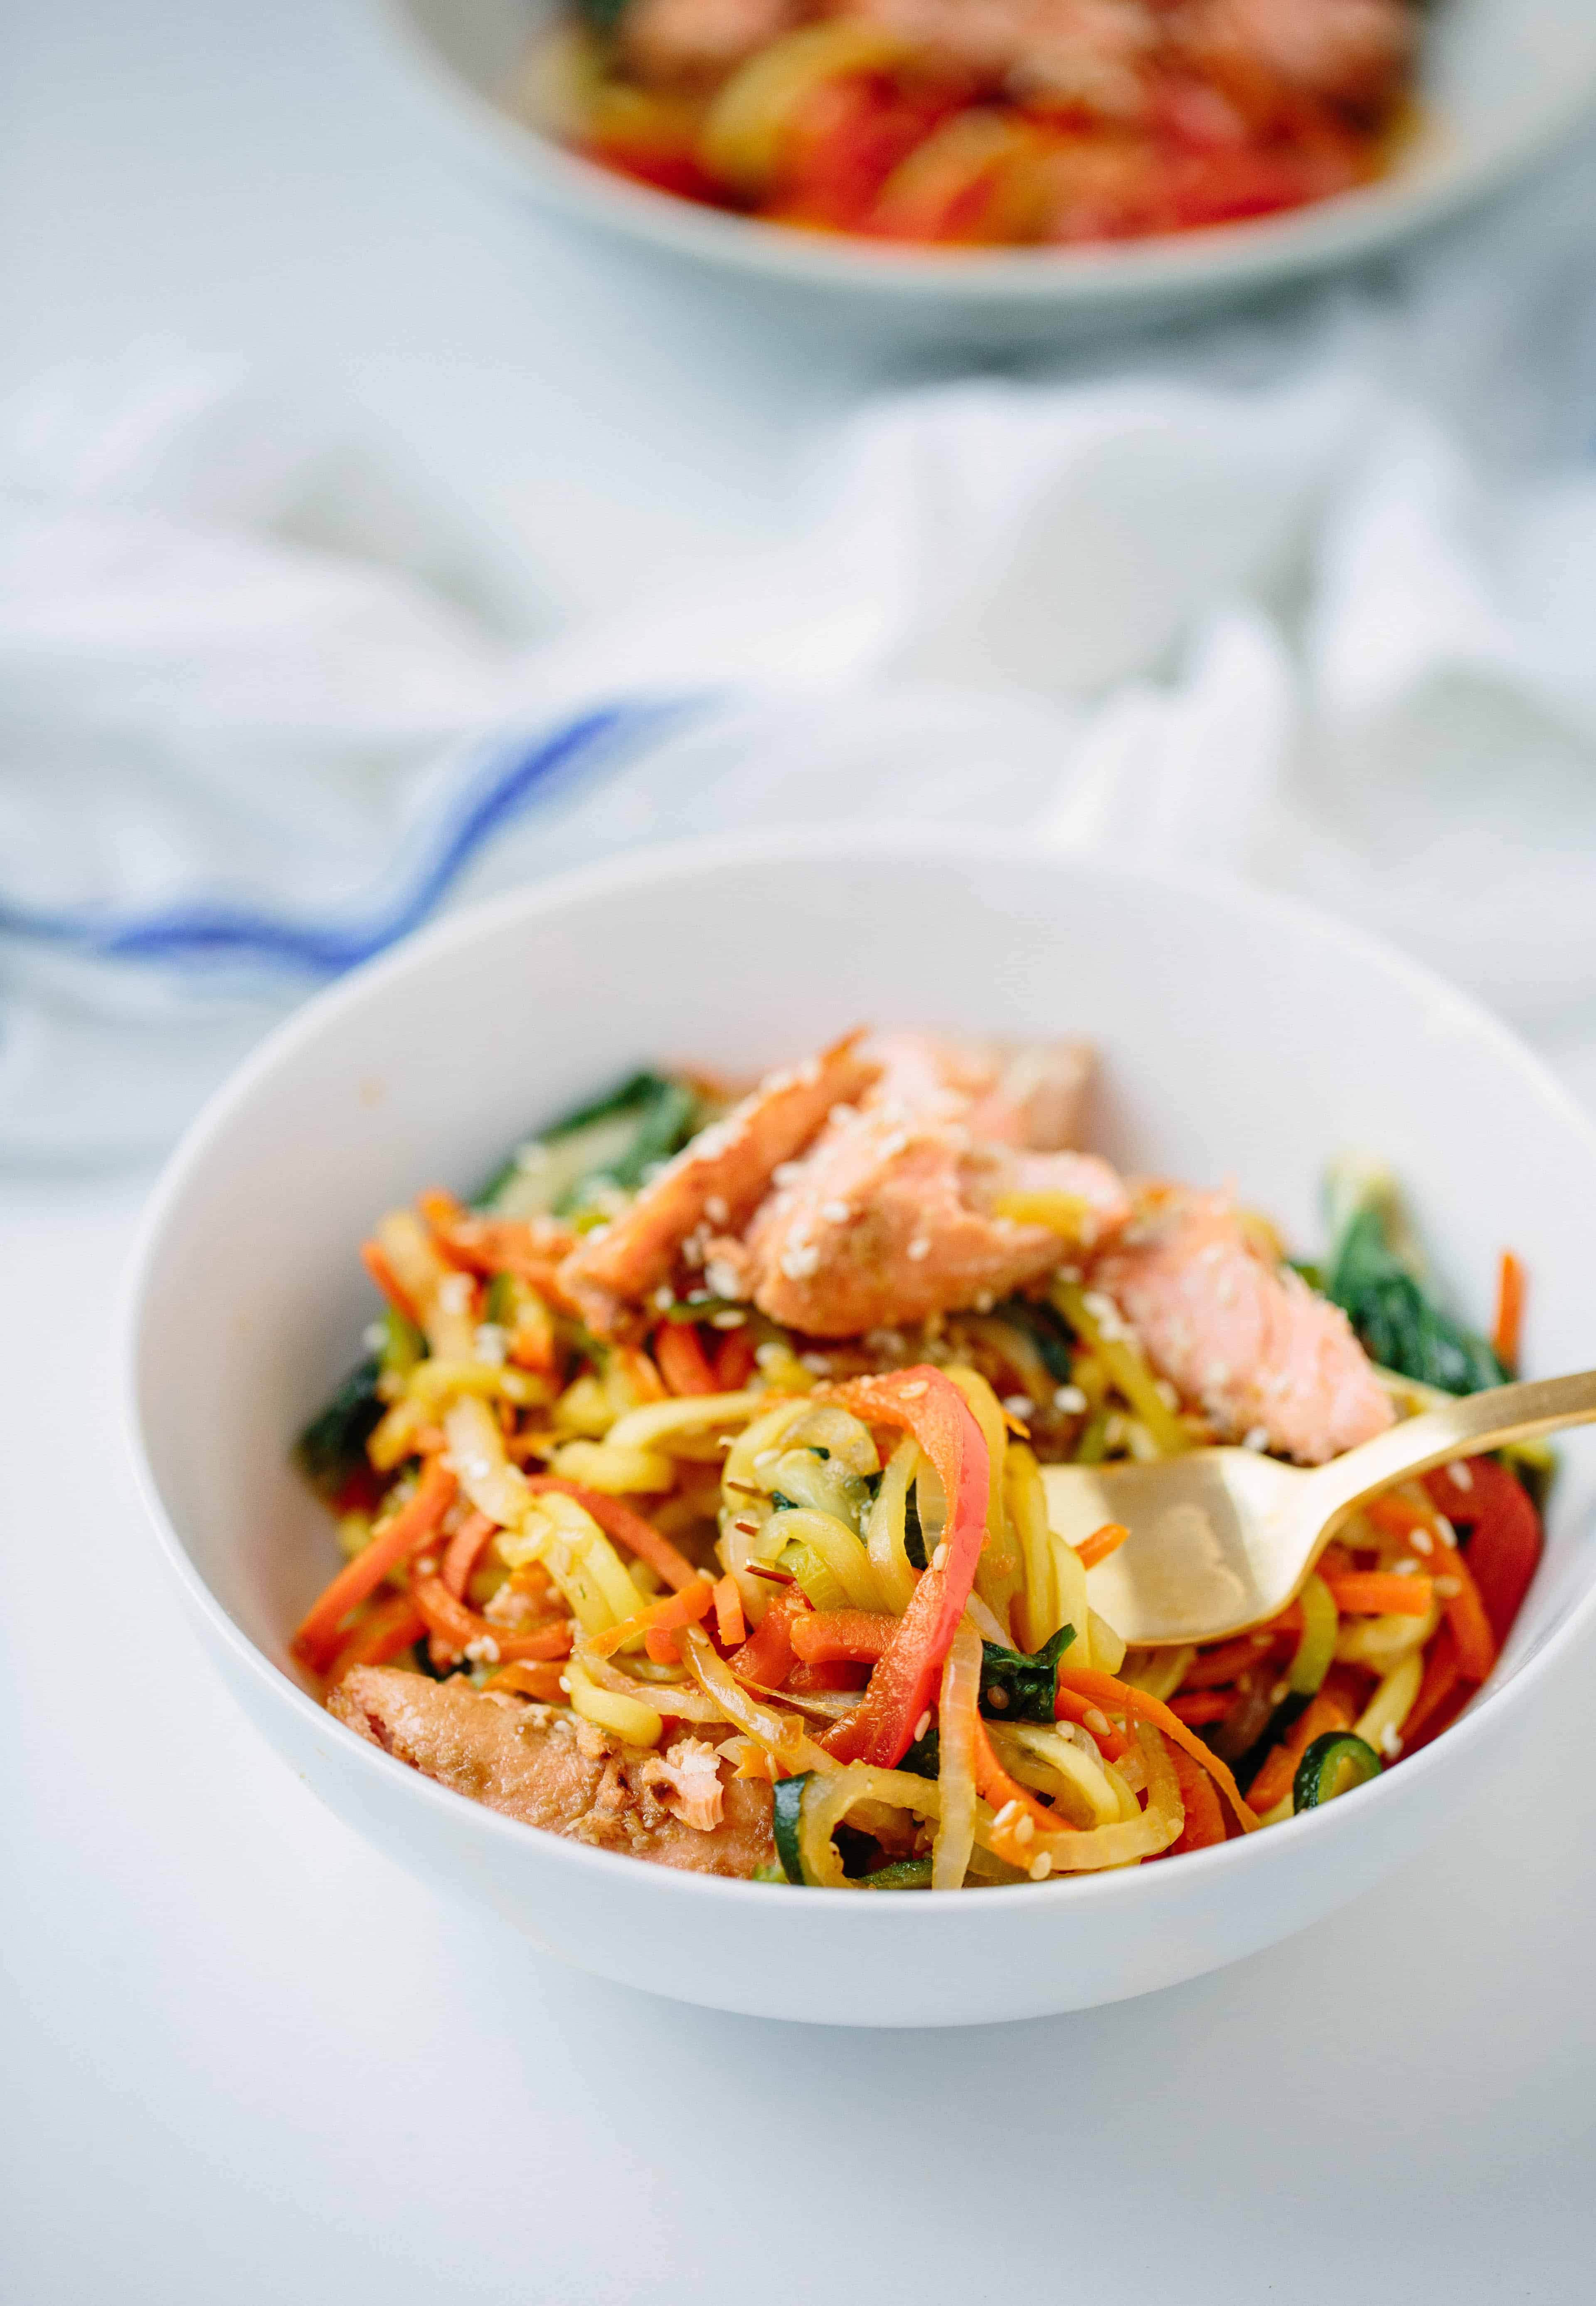 Soy-Ginger Salmon with Teriyaki Zucchini Noodle Stirfry